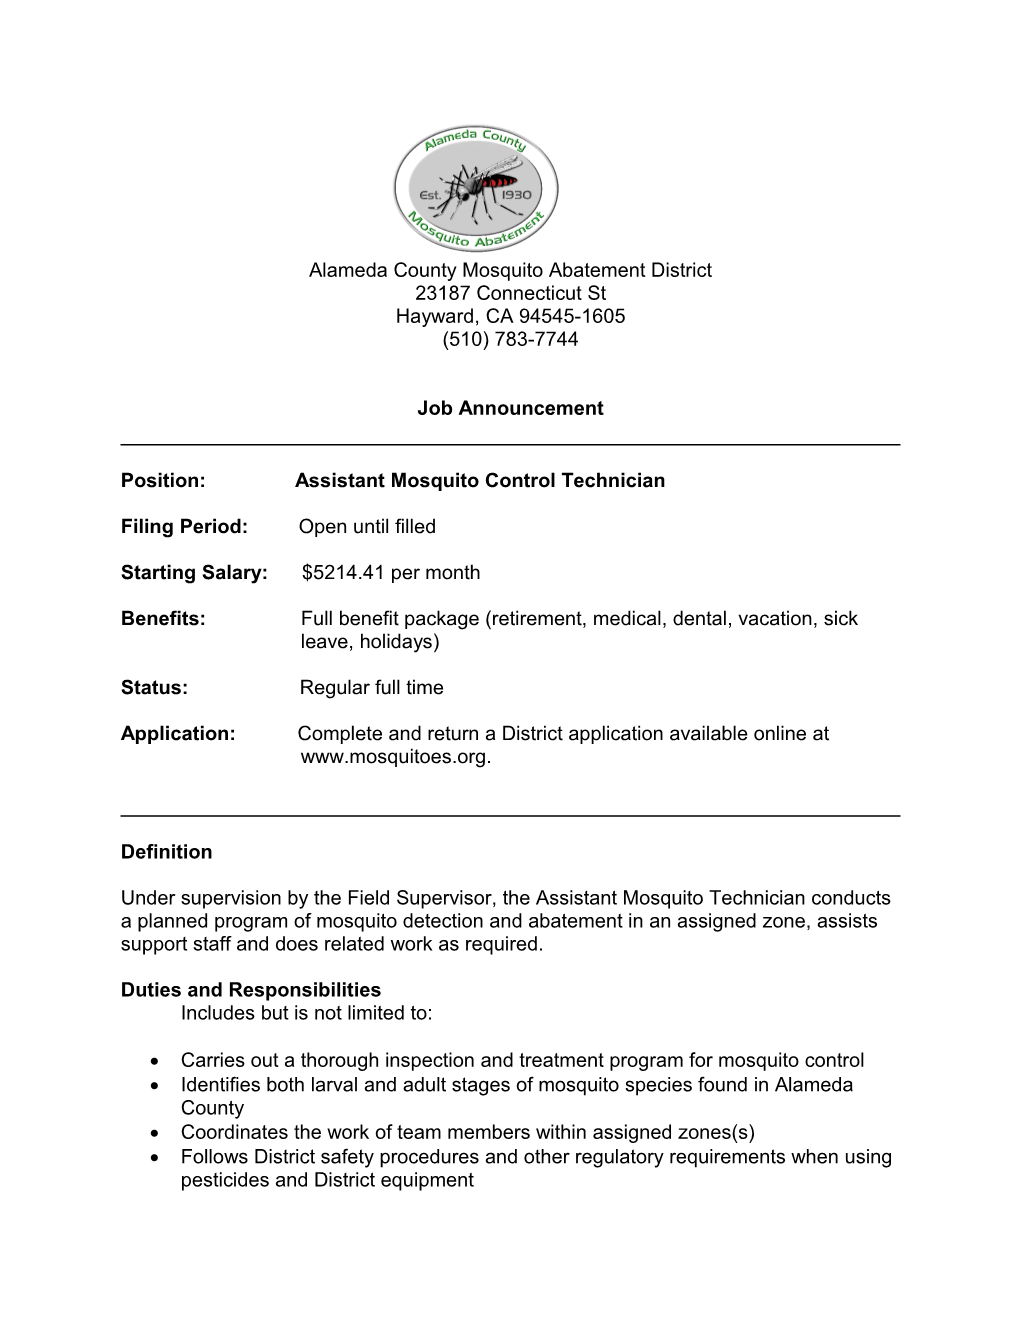 Alameda County Mosquito Abatement District